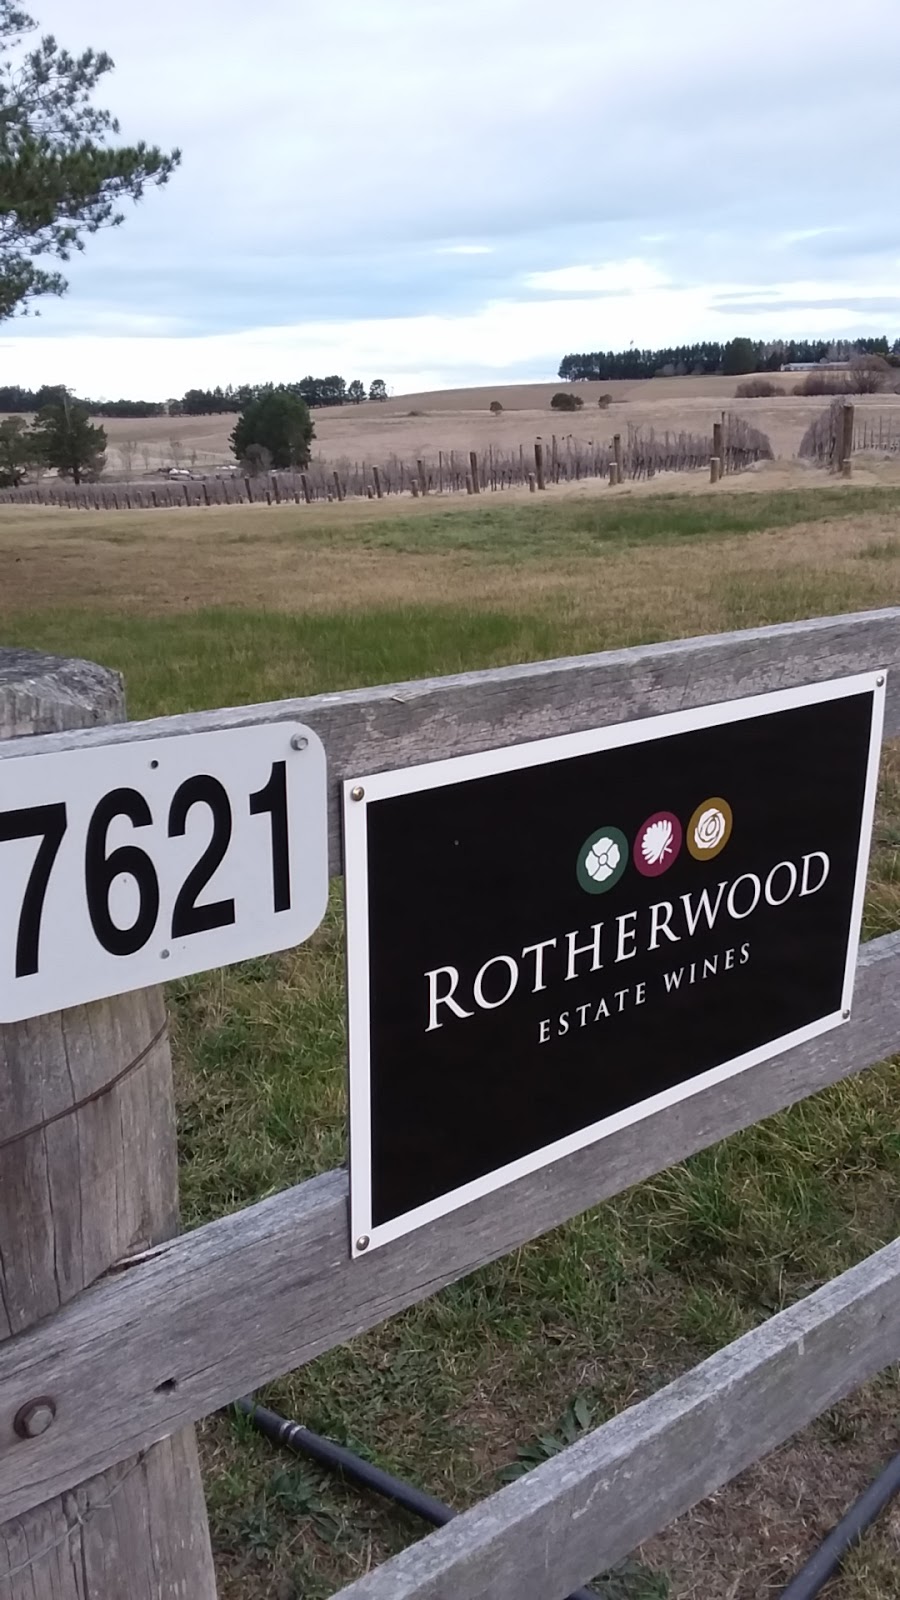 Rotherwood Wines | store | 7621 Illawarra Hwy, Sutton Forest NSW 2577, Australia | 0248789086 OR +61 2 4878 9086